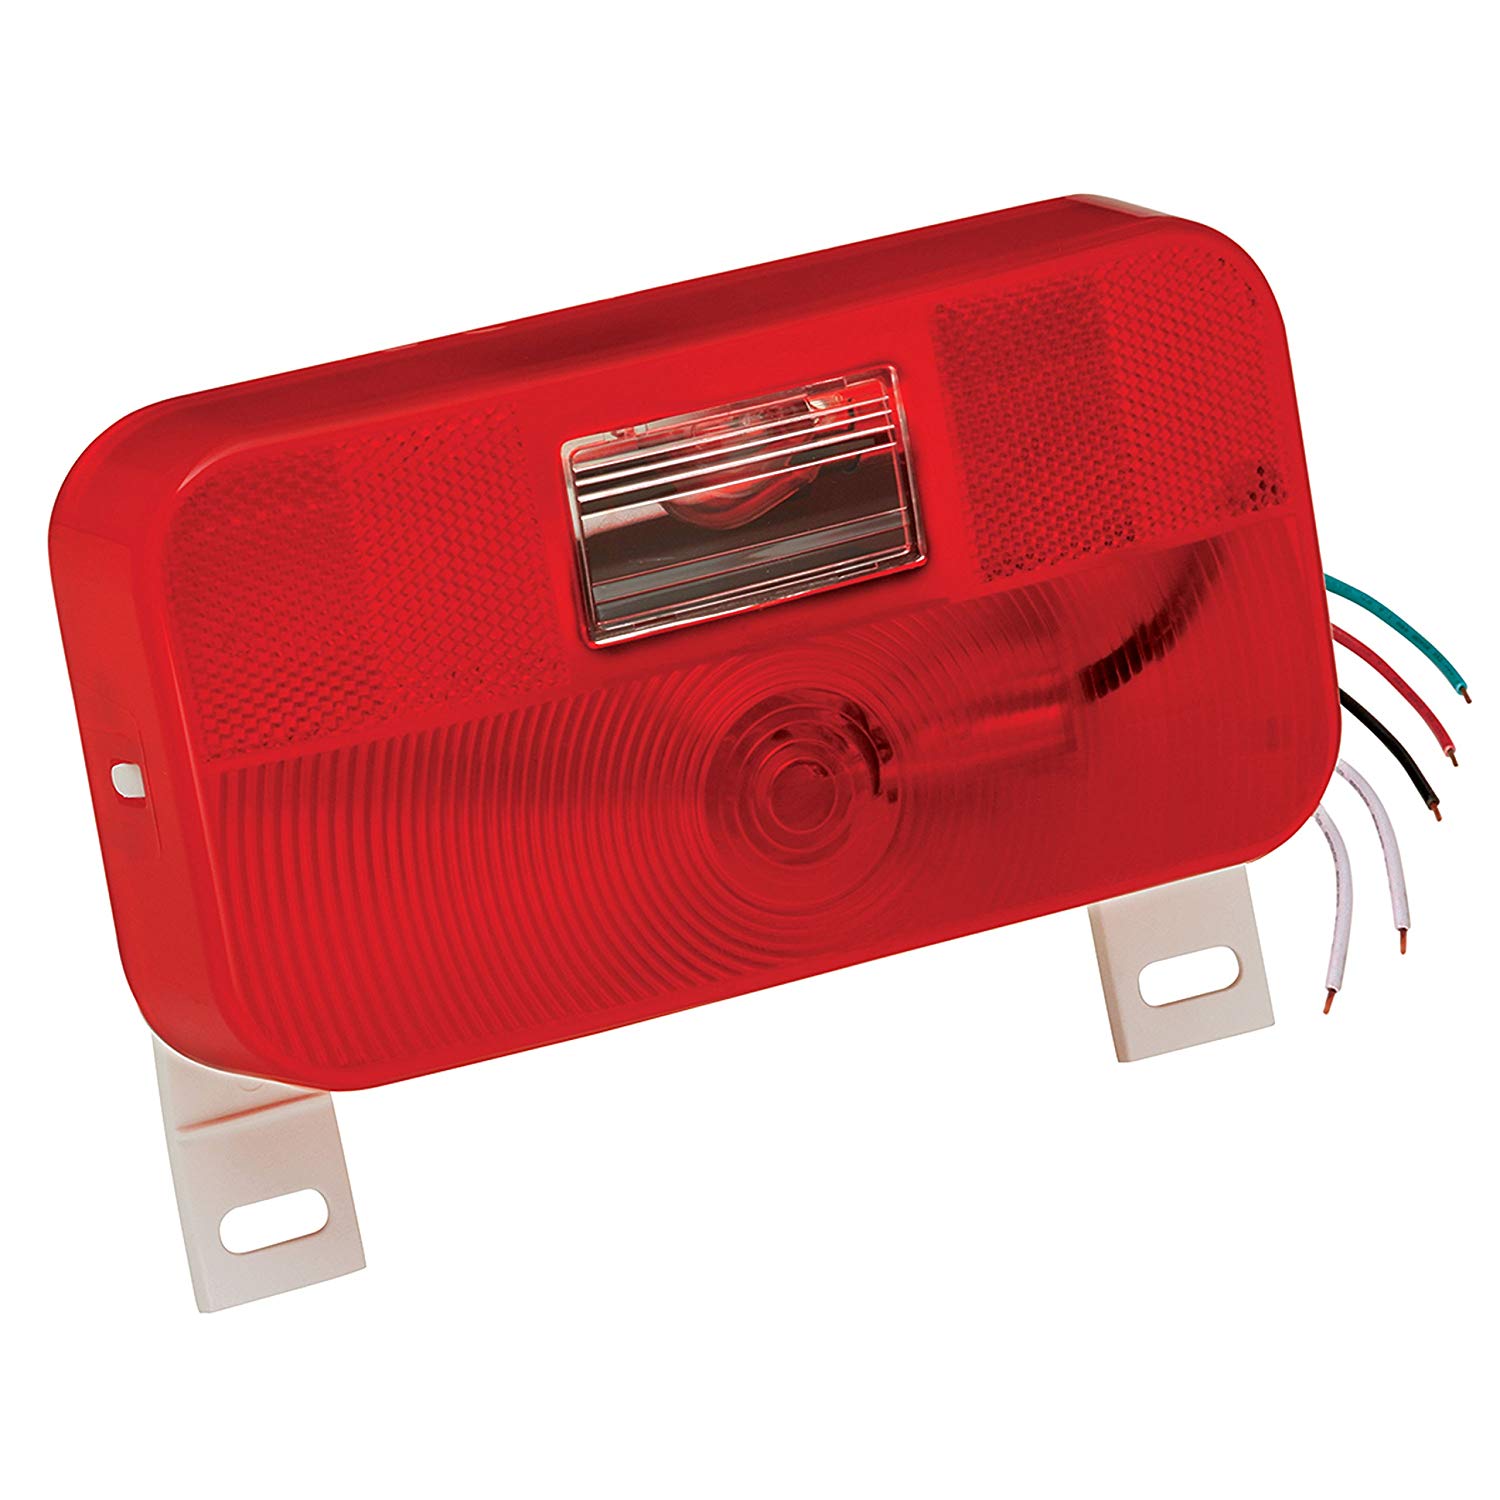 Bargman 34-92-004 92 Series Red Surface Mount Tail Light with Backup and License Plate Lights - White Base